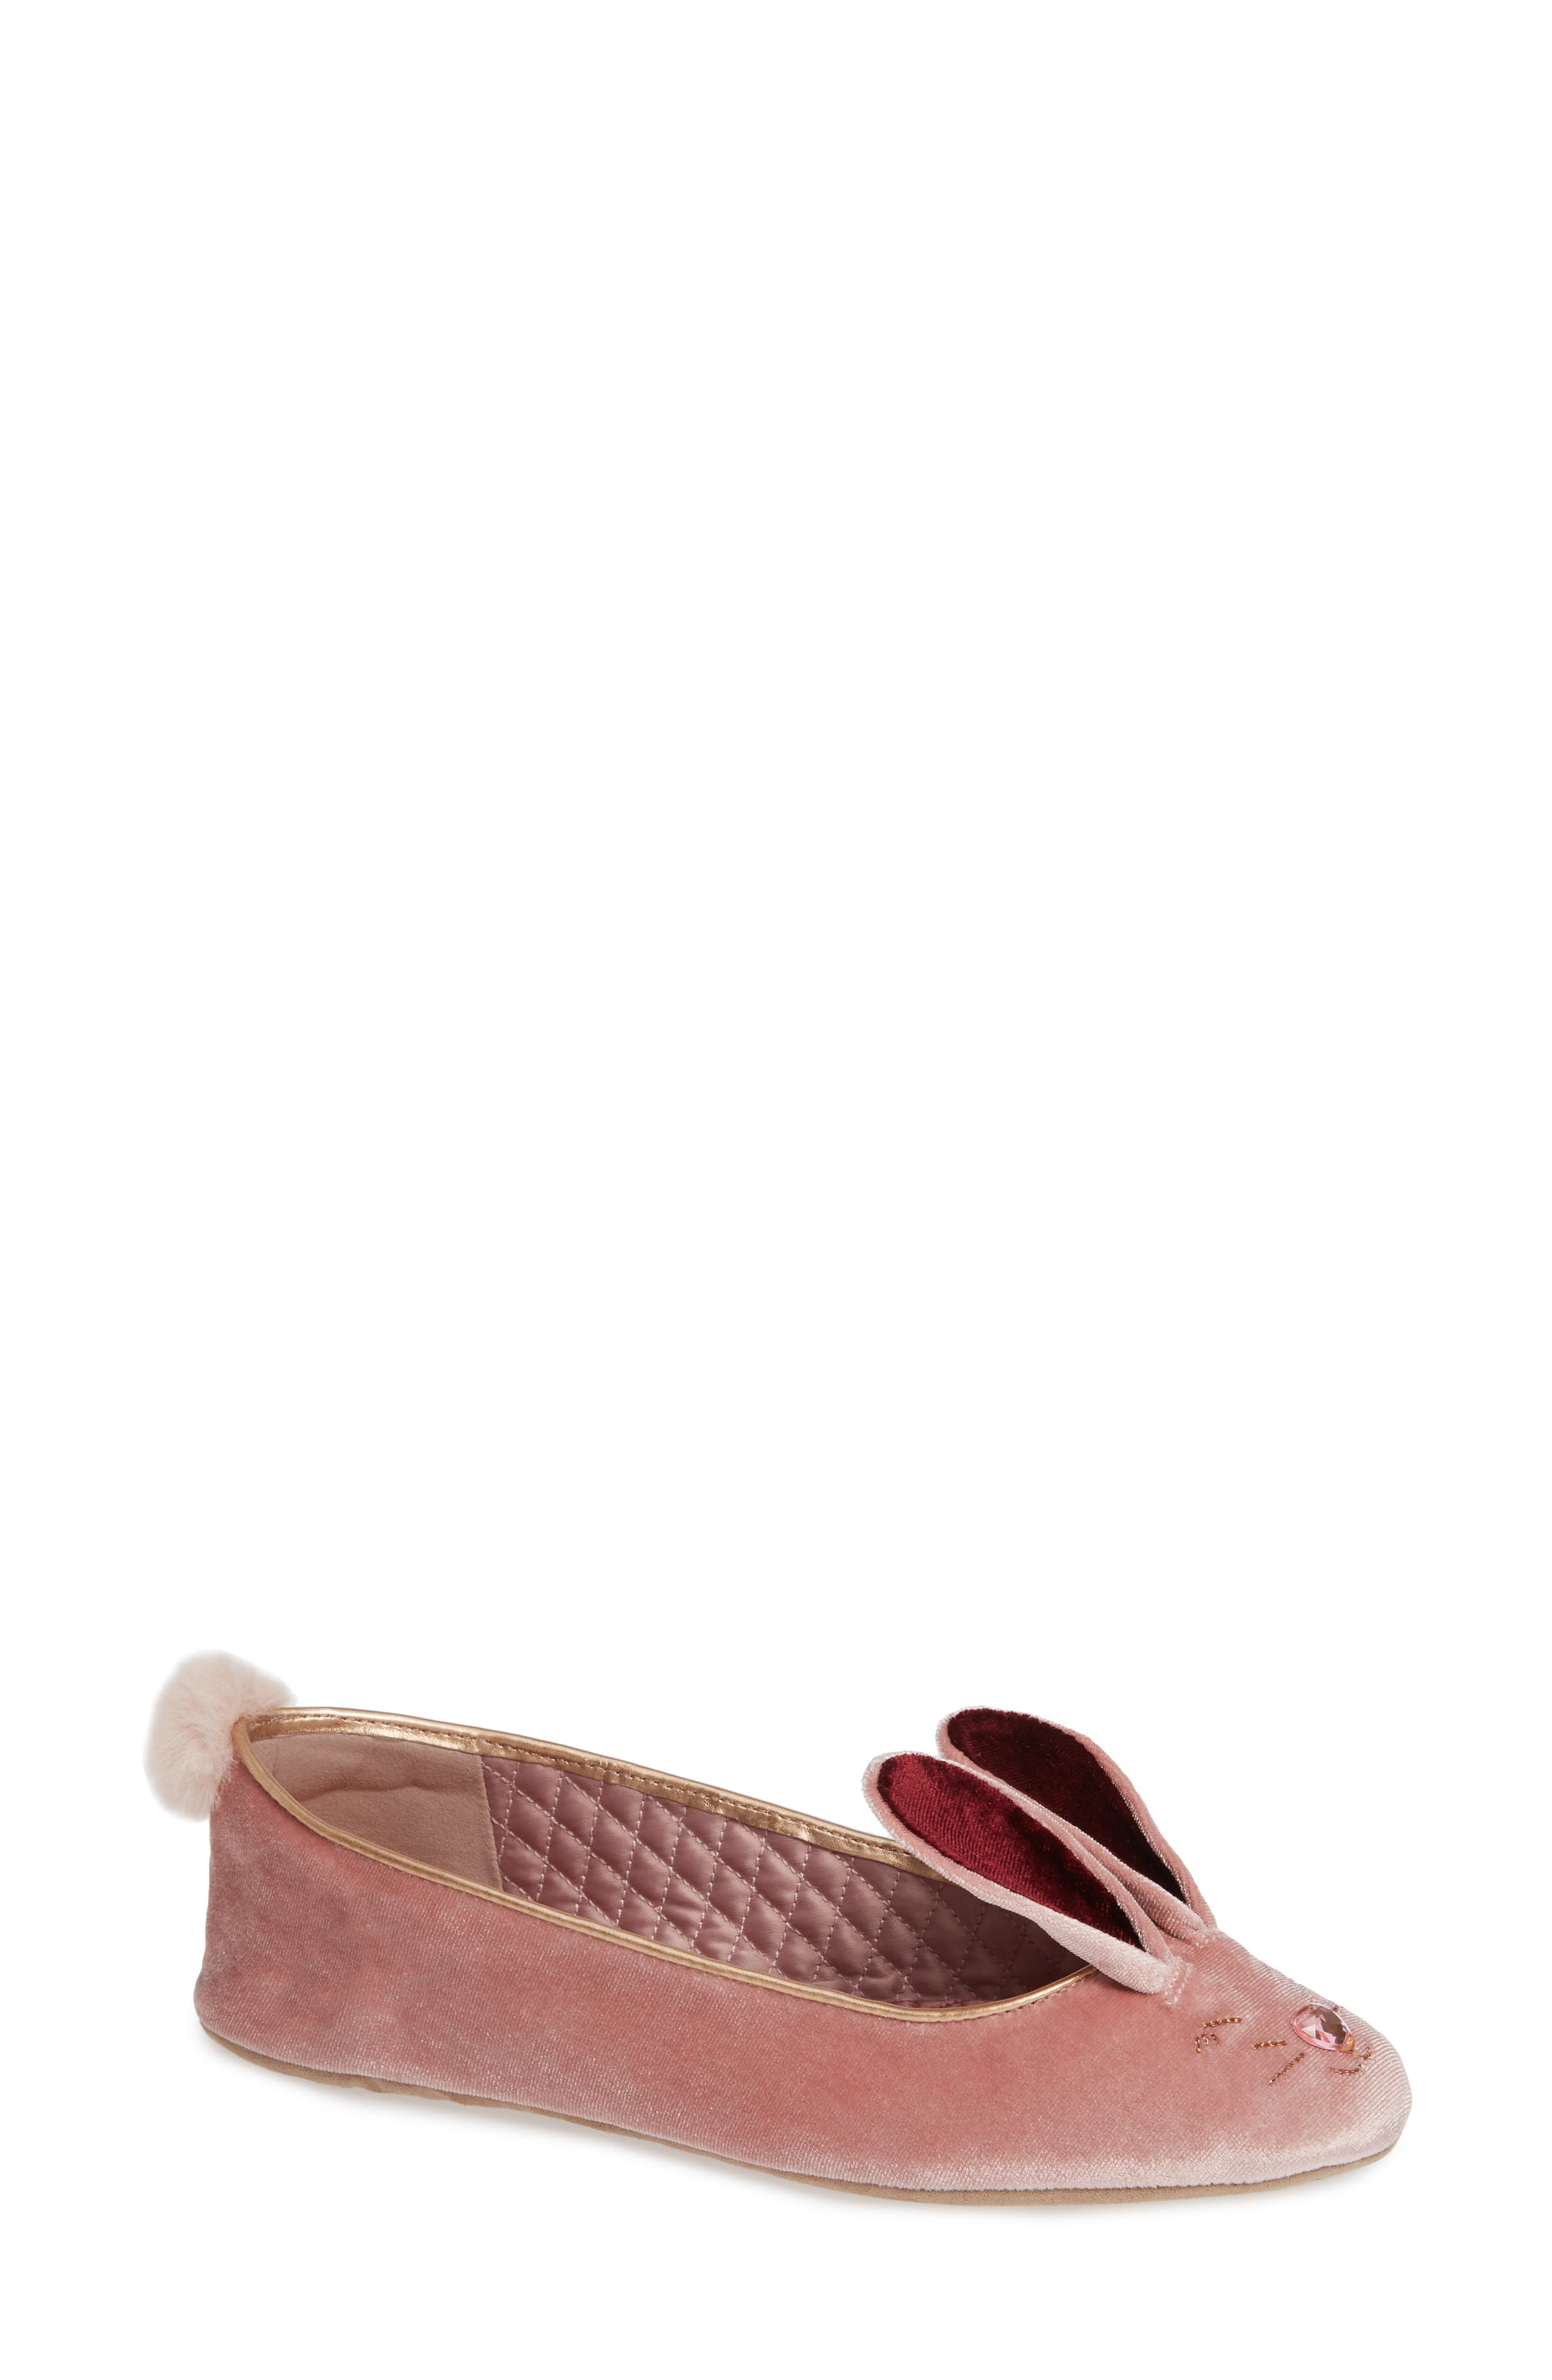 Ted Baker Women's Shoes